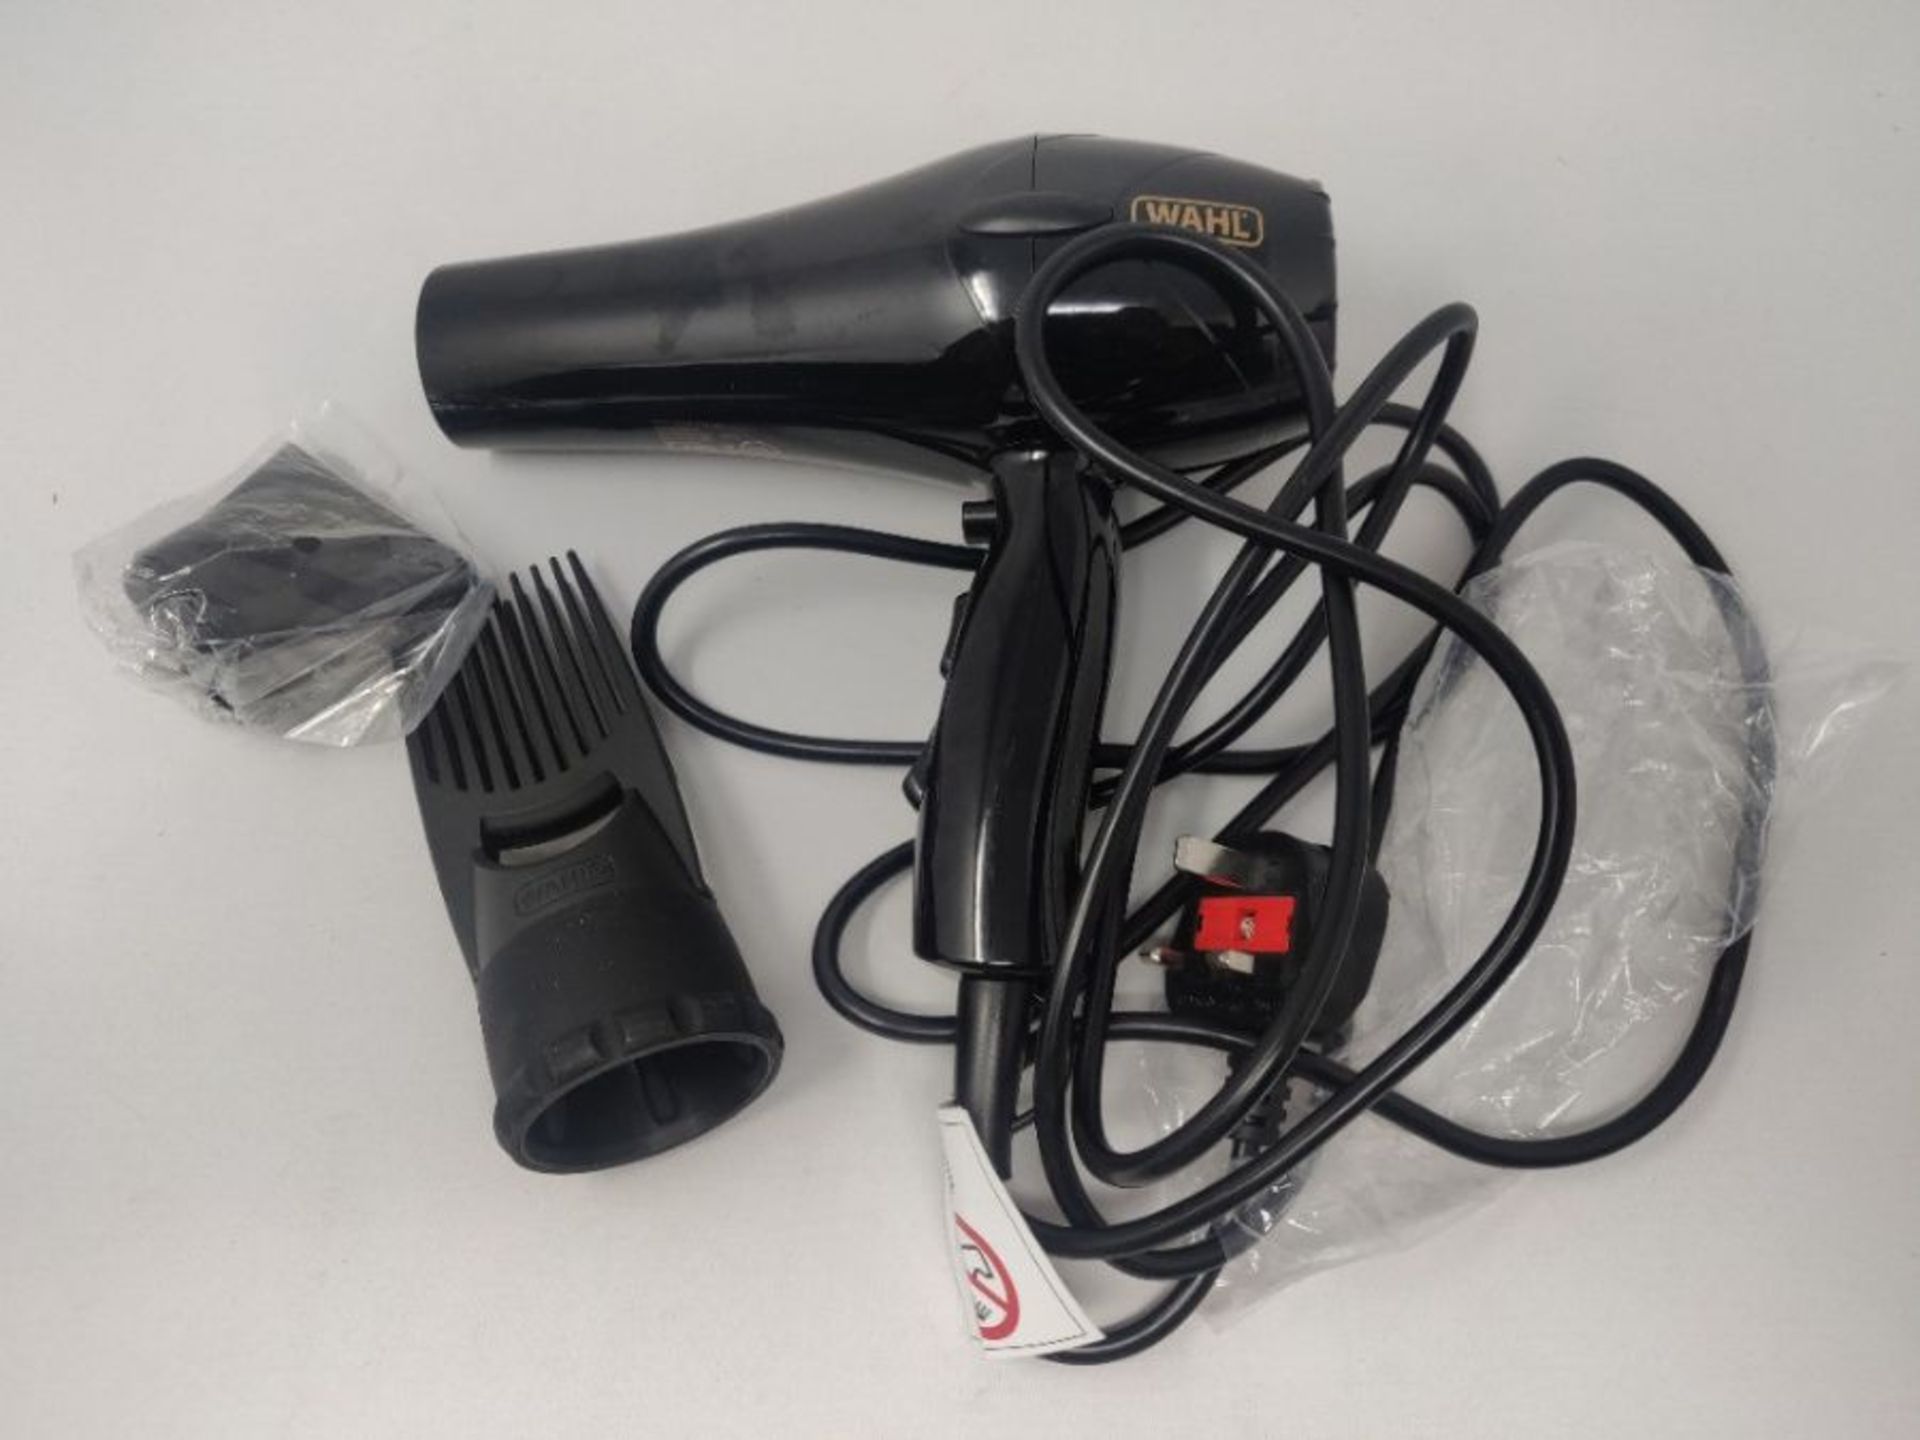 Wahl Hairdryers for Women Powerpik 2 Hair Dryer with Pik Attachment, Afro Hairdryer - Image 2 of 3